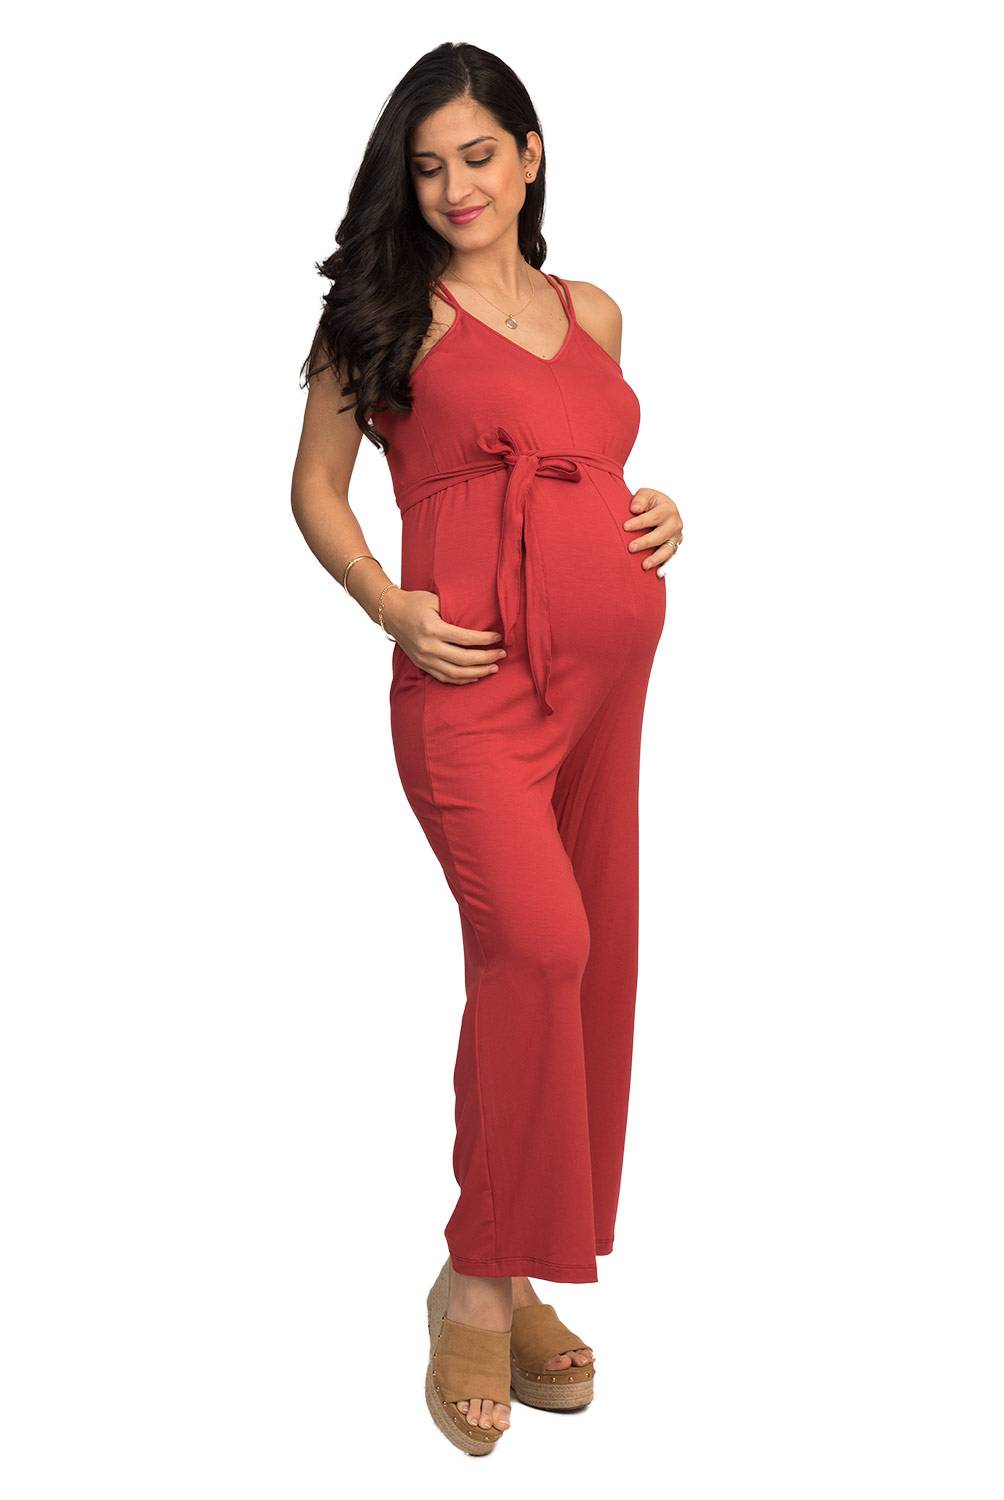 BUP MATERNITY - Overall Maternal Bup Maternity